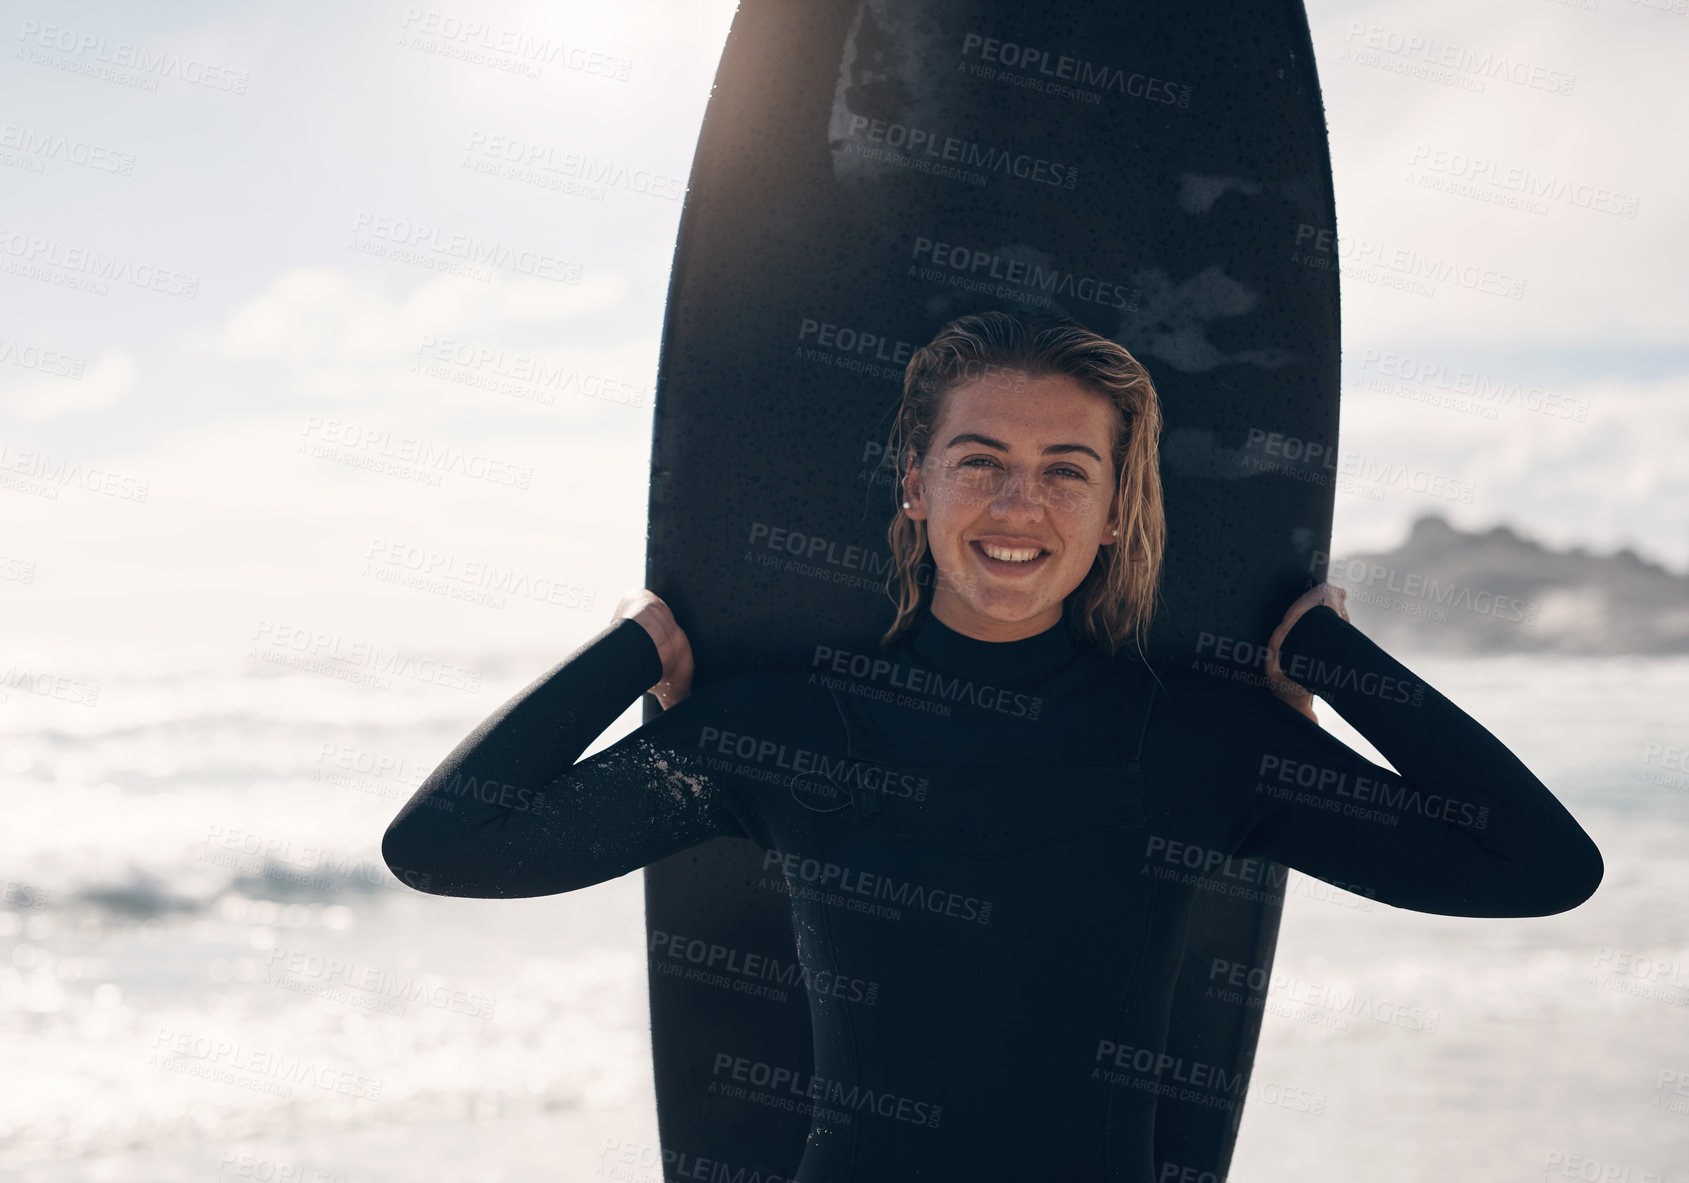 Buy stock photo Cropped shot of a young woman standing on the beach with her surfboard